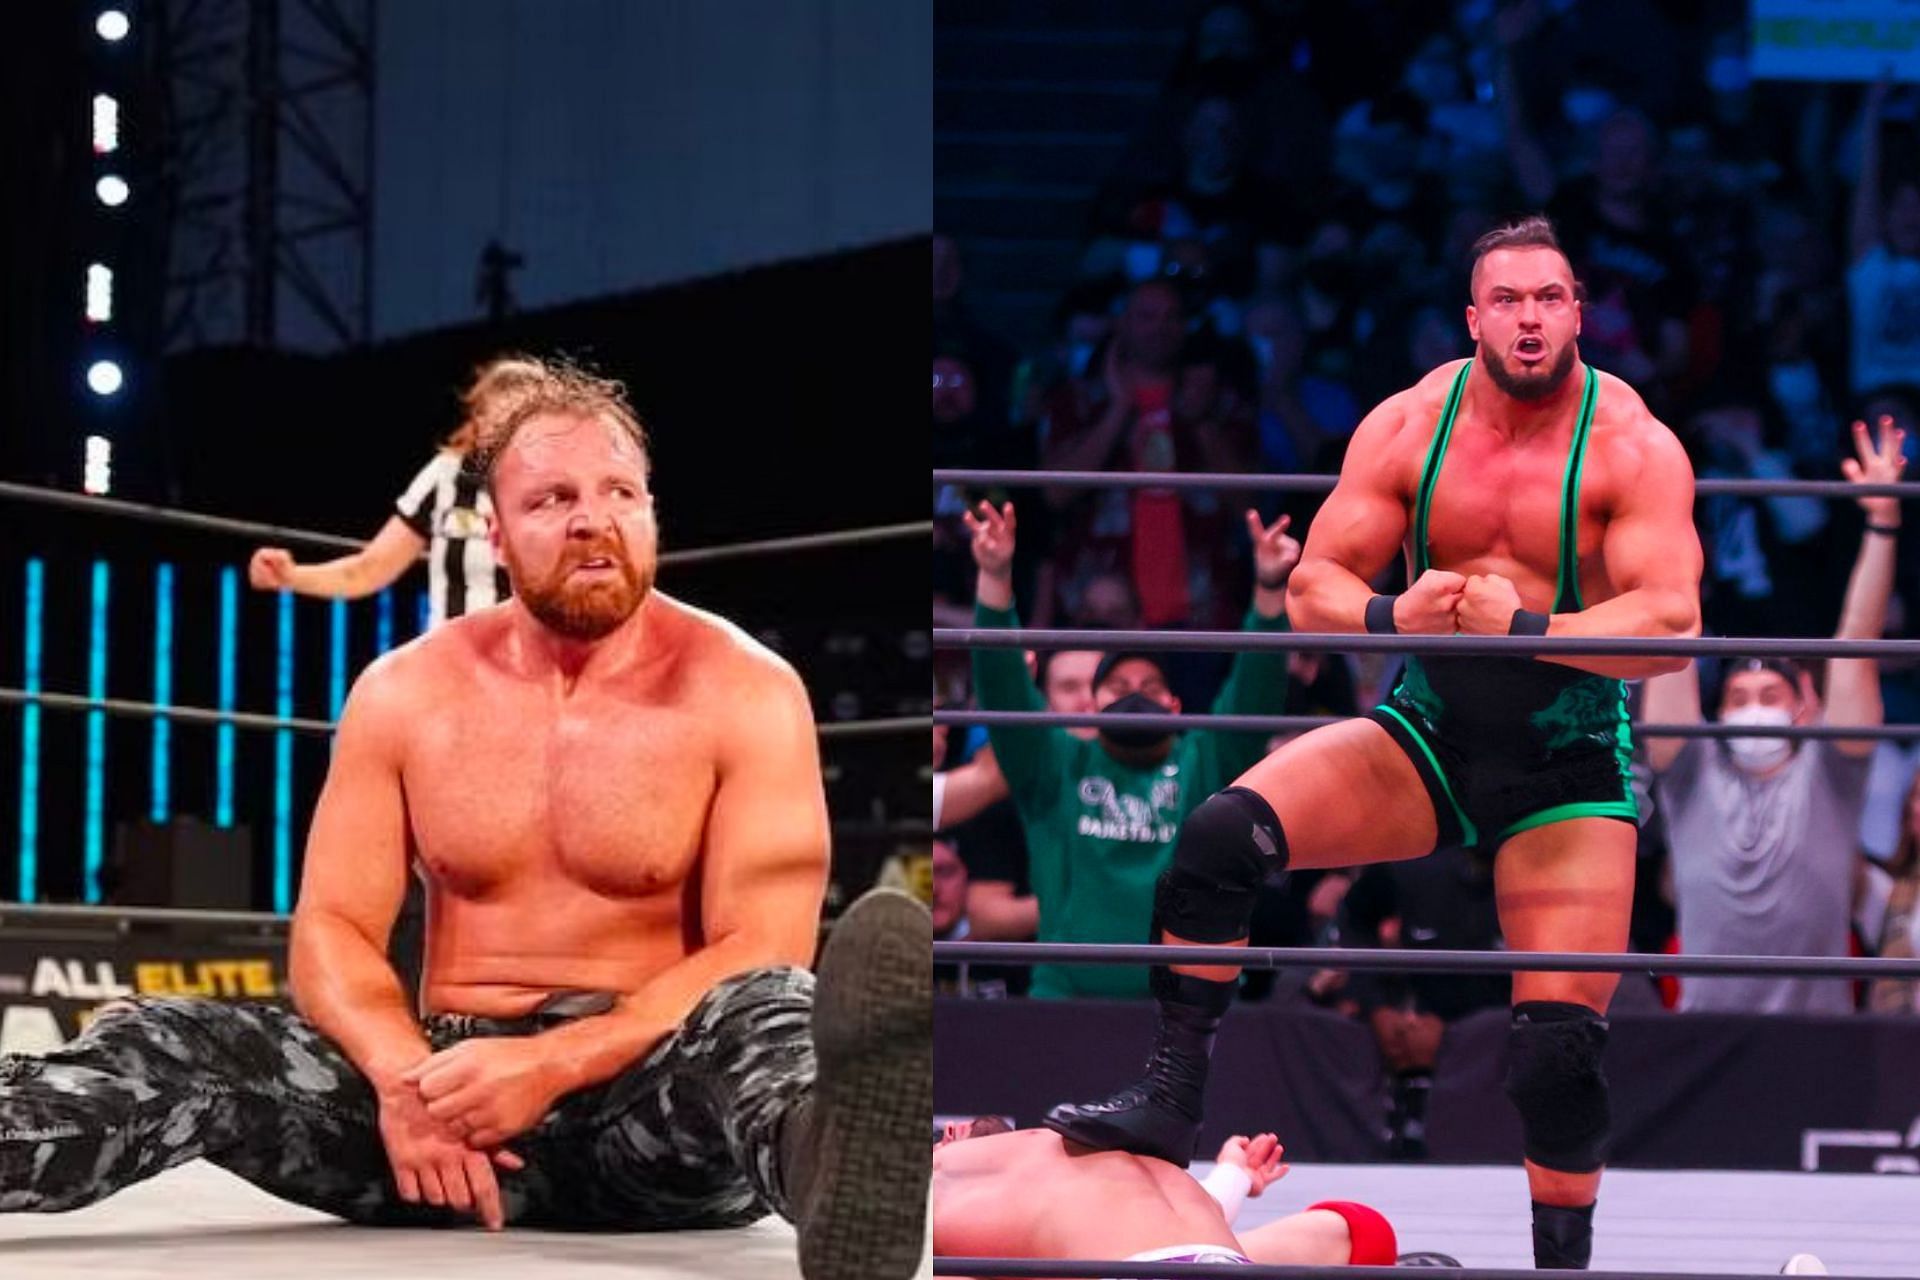 Jon Moxley and Wardlow were in action on Rampage